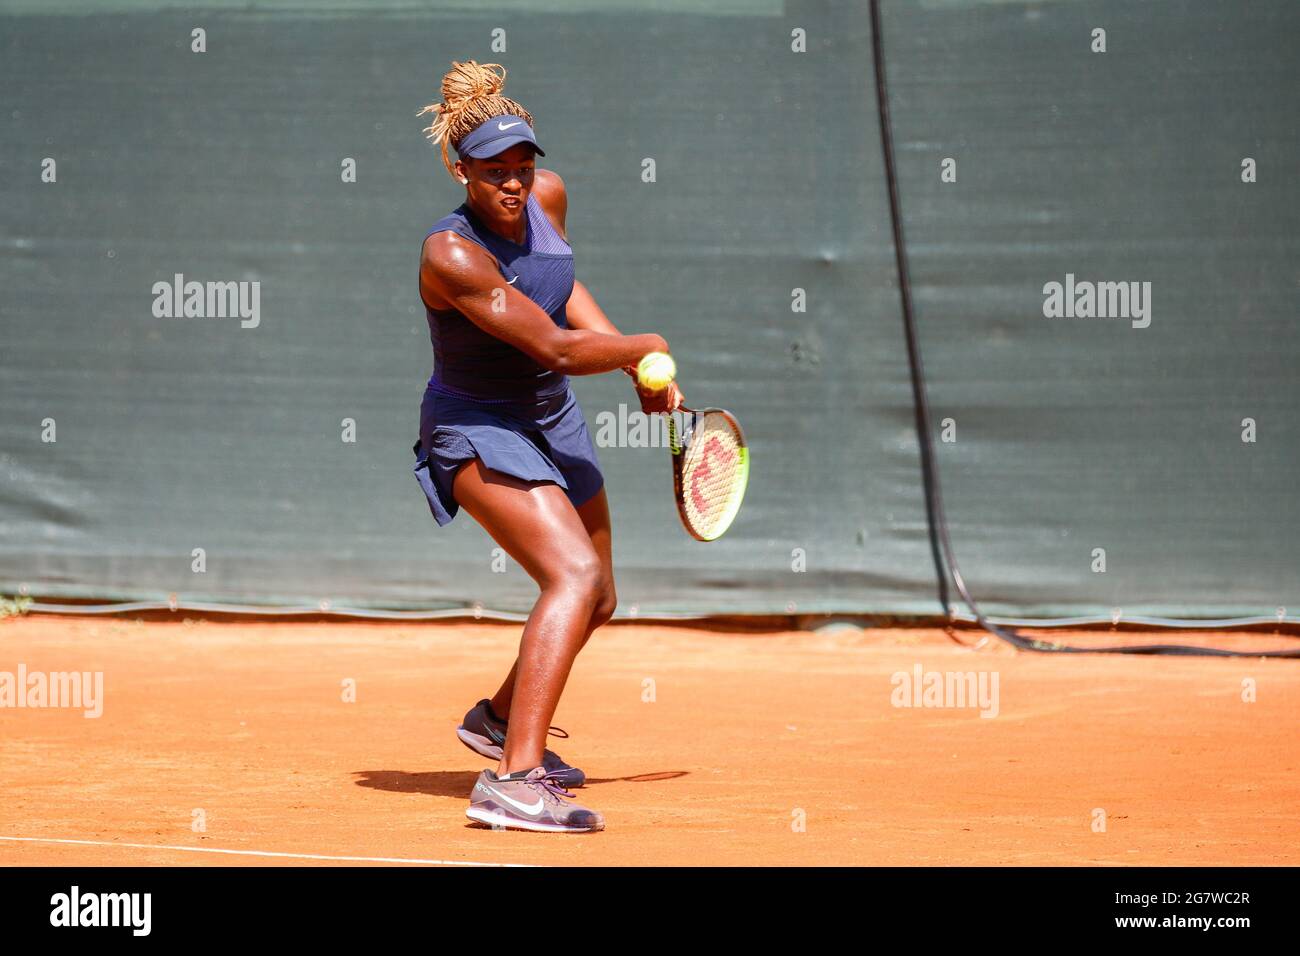 Milan, Italy. 16th July, 2021. Ngounoue Clervie from USA during Bonfiglio  Trophy 2021, Tennis Internationals in Milan, Italy, July 16 2021 Credit:  Independent Photo Agency/Alamy Live News Stock Photo - Alamy